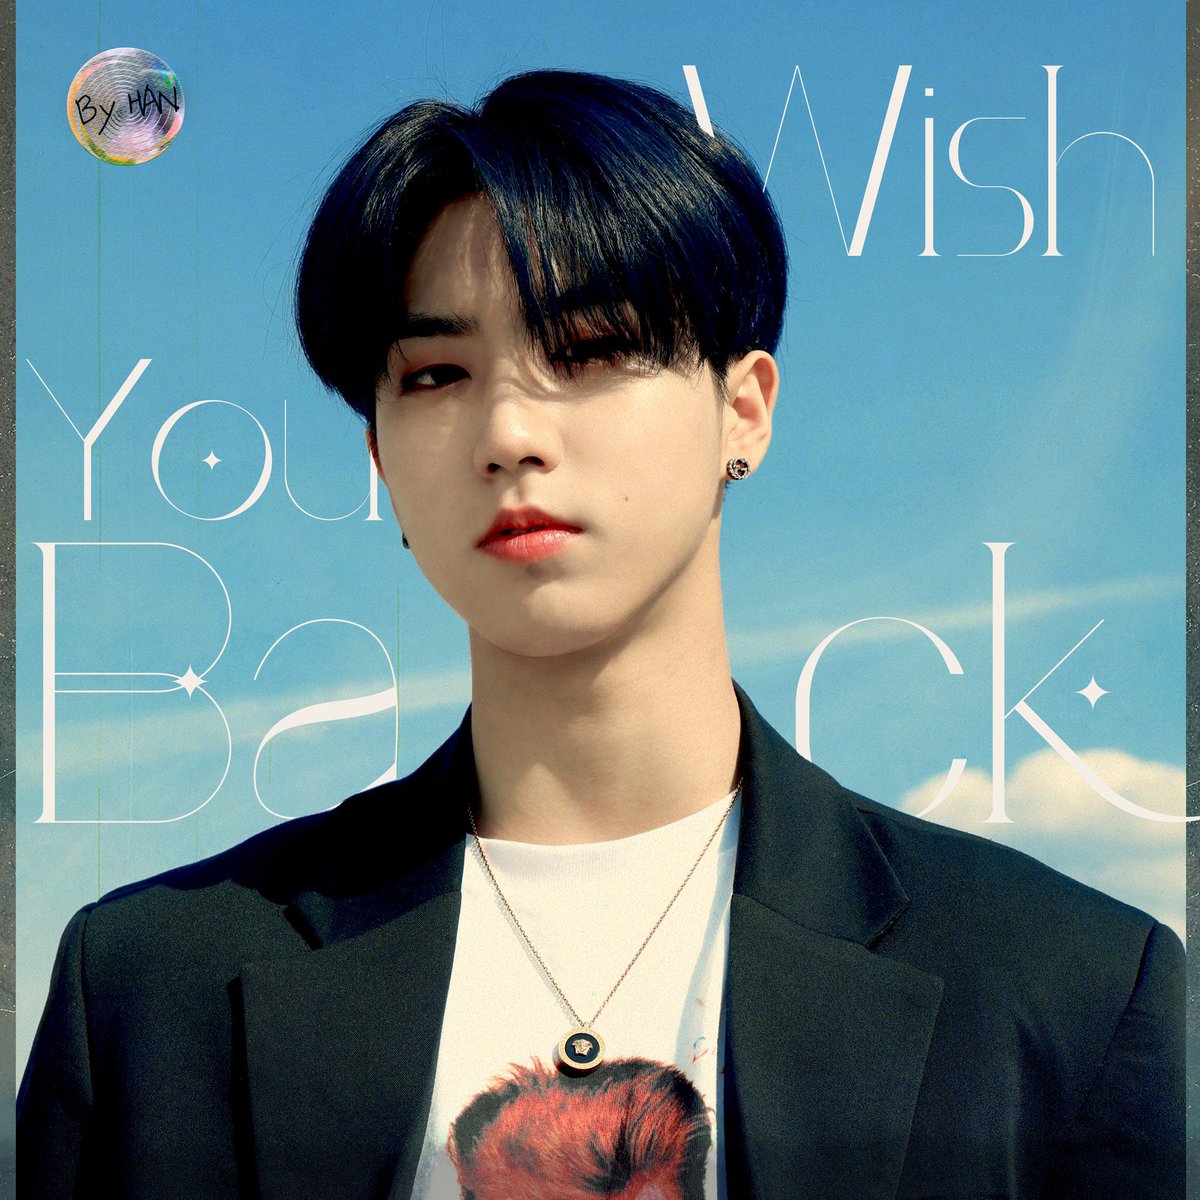 Happy birthday wish you back 🤍
It’s been 3 years since this beautiful song was posted 🥹

Wishing WISH YOU BACK happy anniversary 
#WISHYOUBACKturns3
#HAN @Stray_Kids